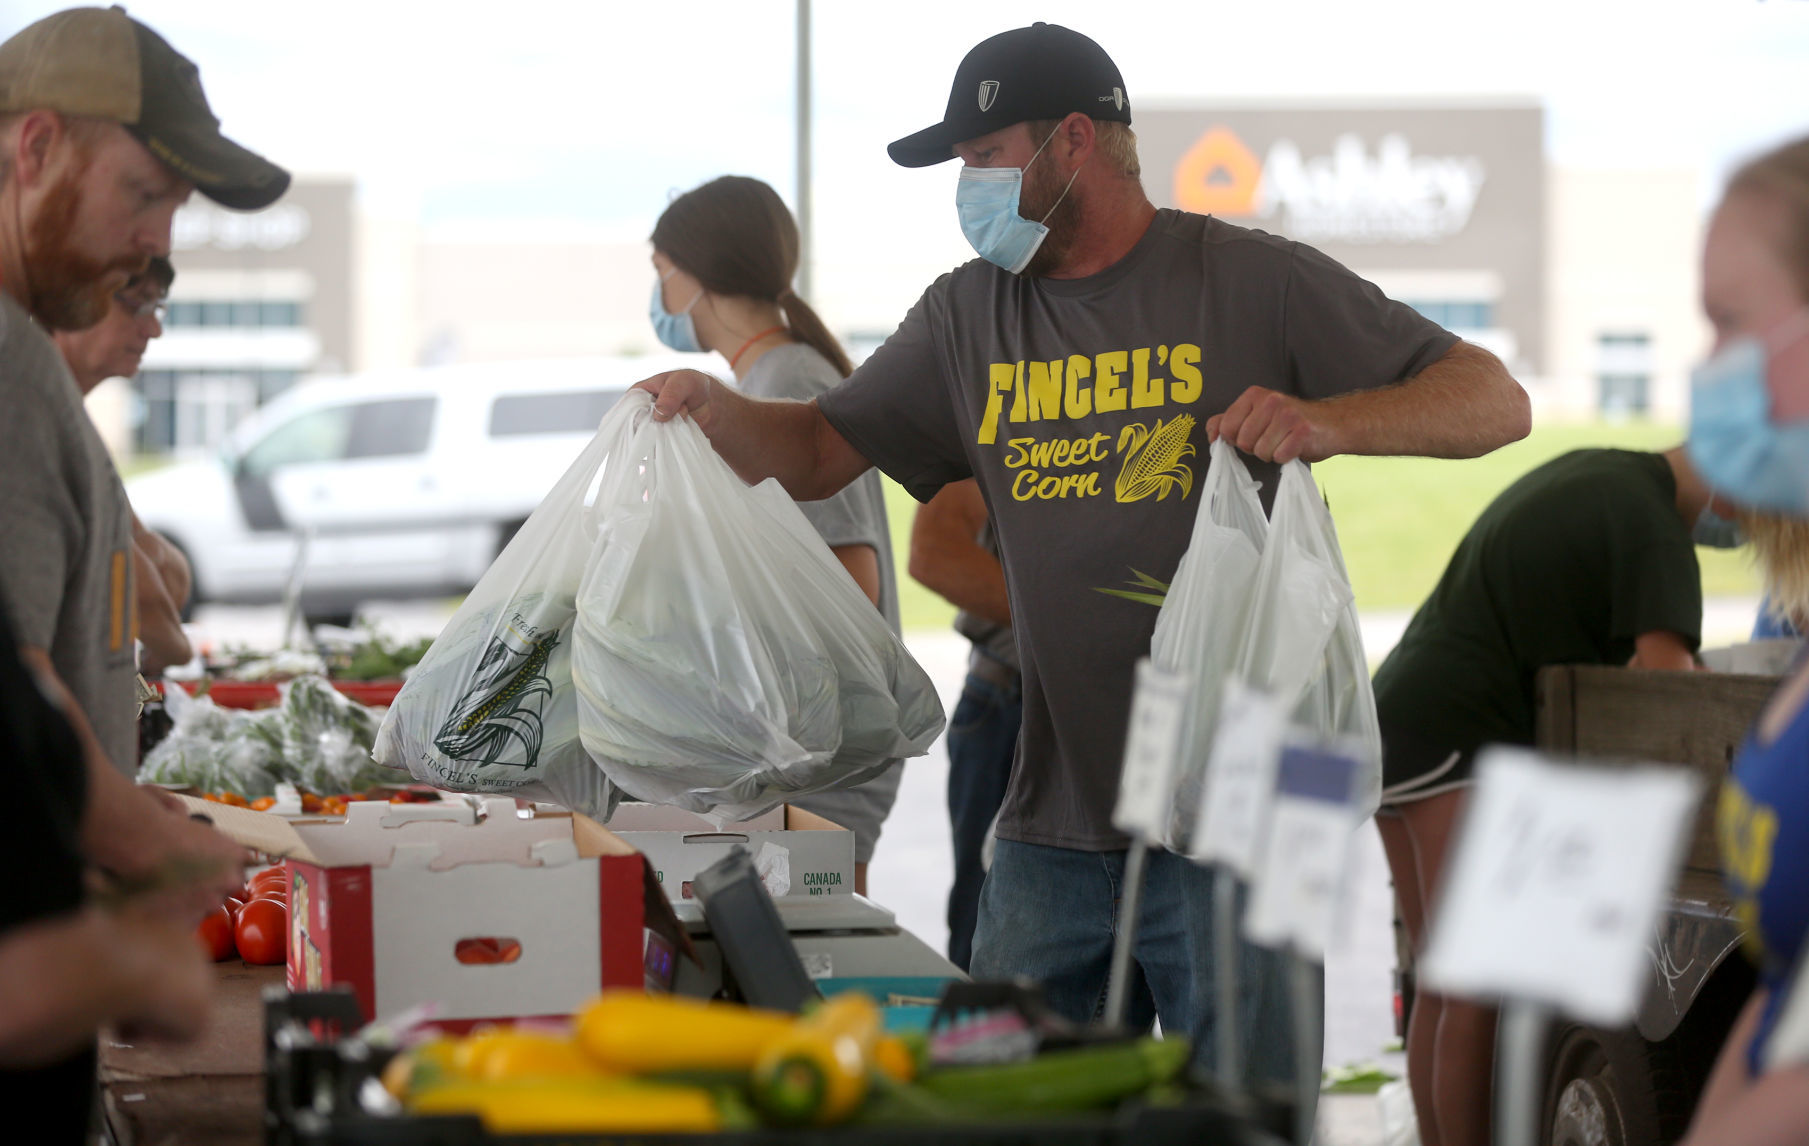 Craig Fincel carries bags of sweet corn during opening day of Fincel